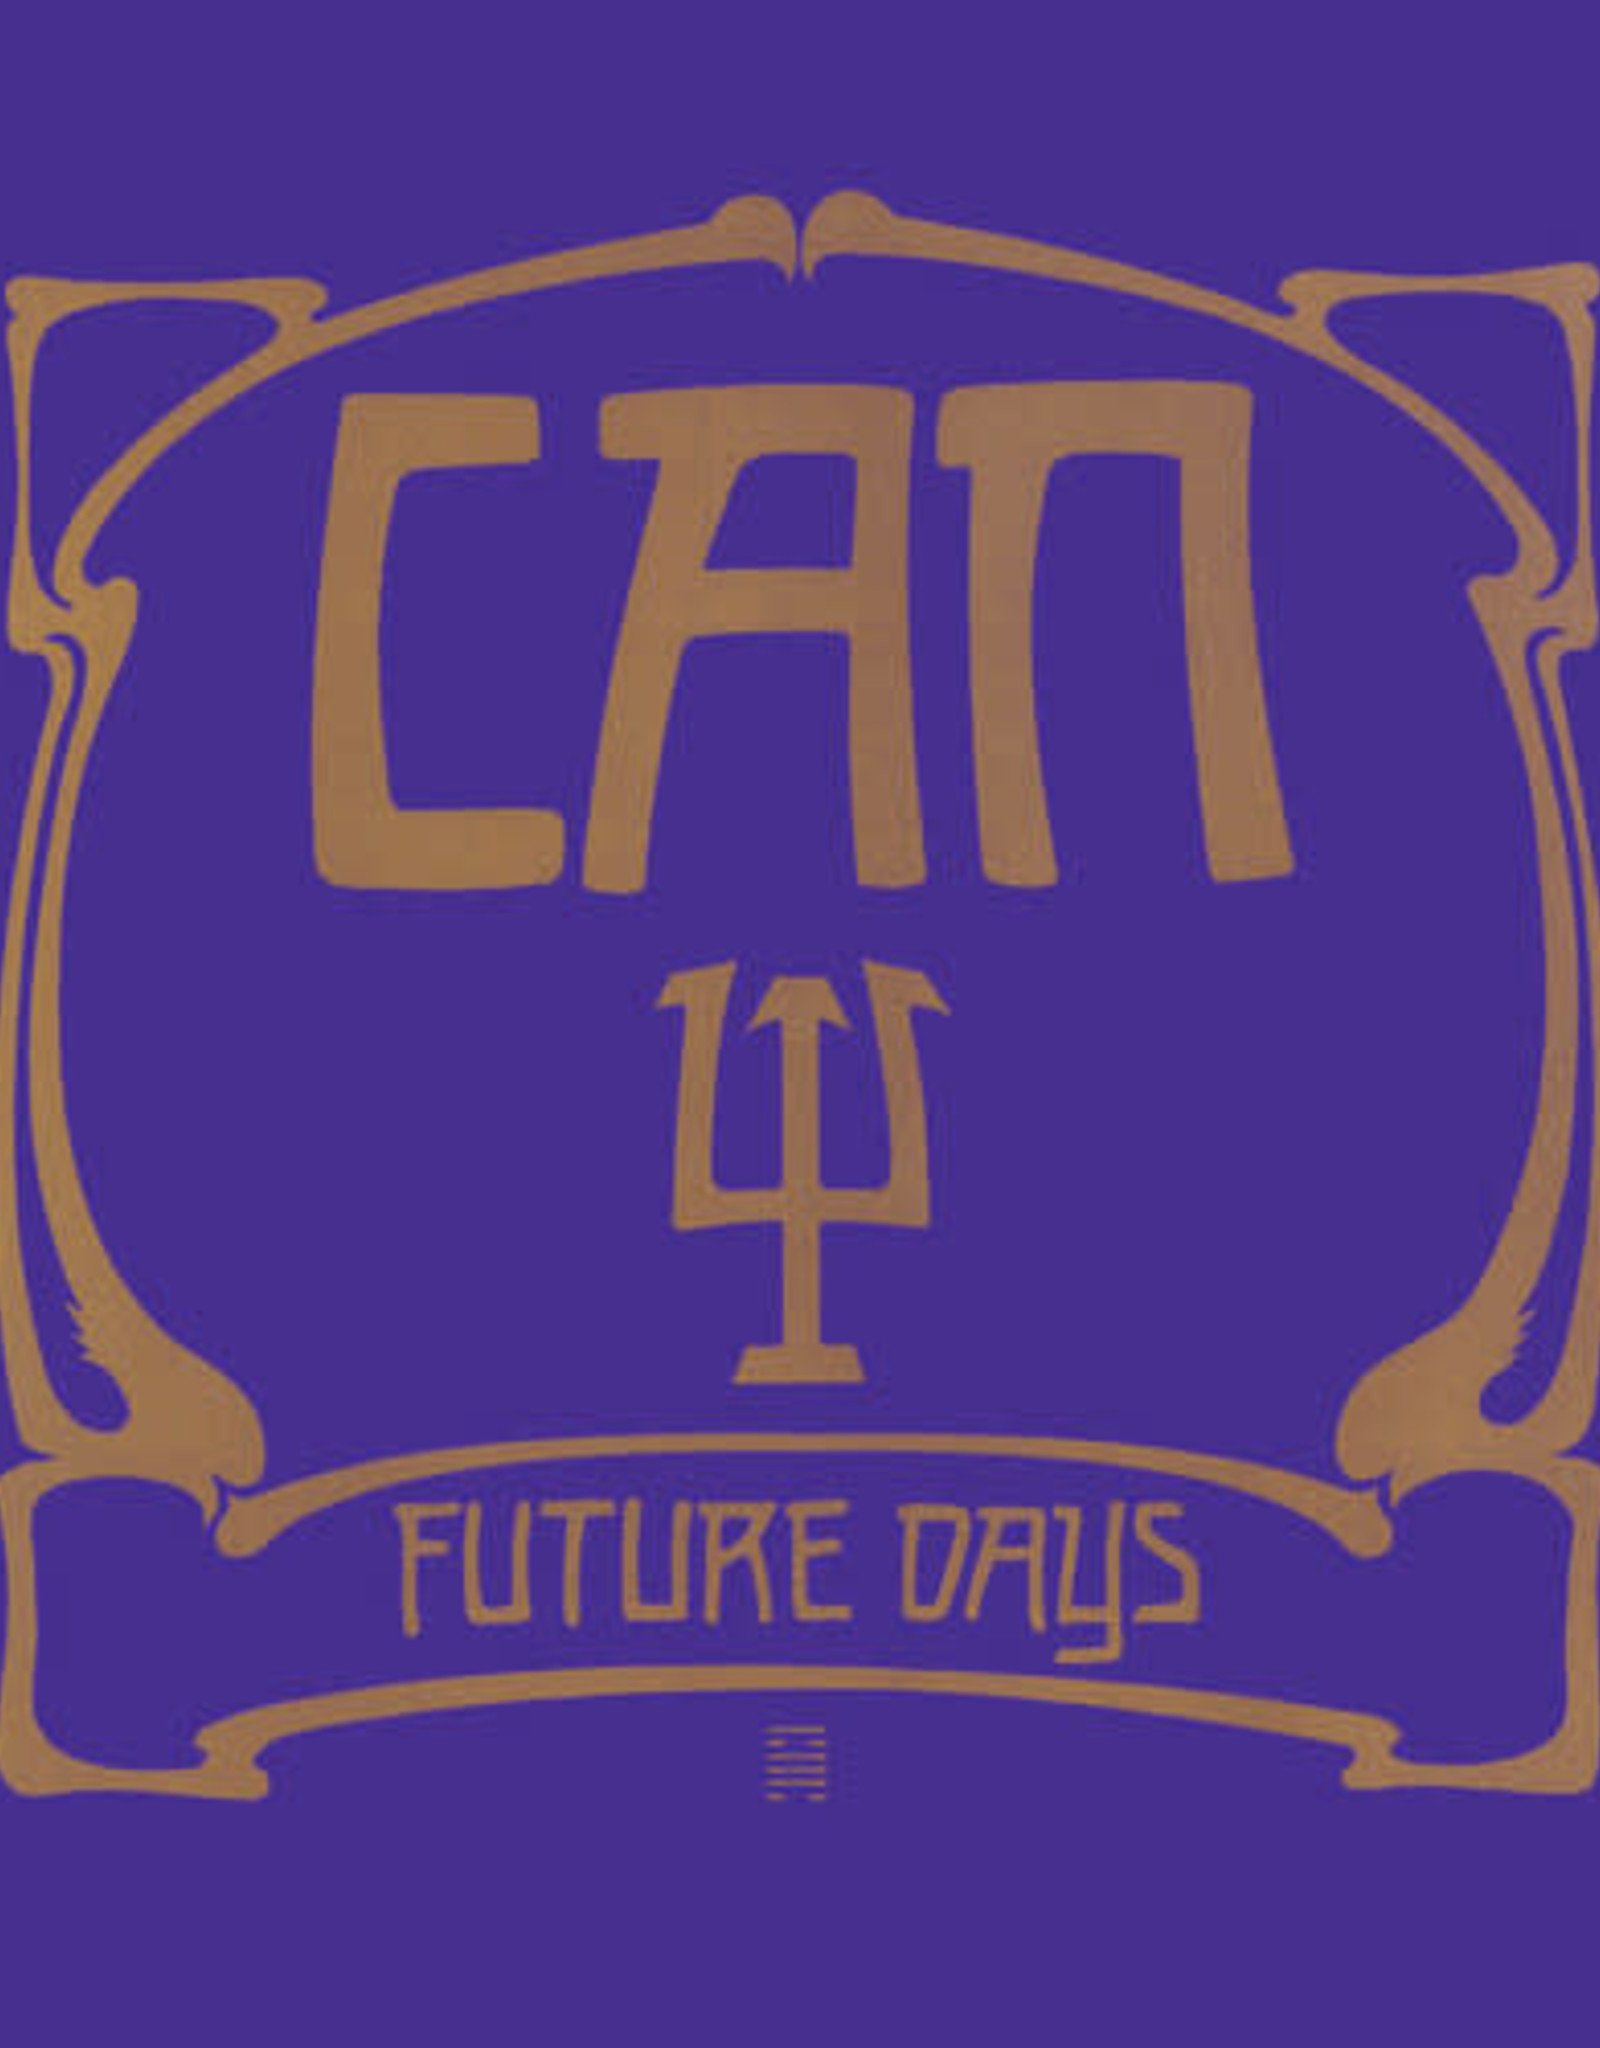 Can - Future Days (Limited Edition Gold Vinyl)